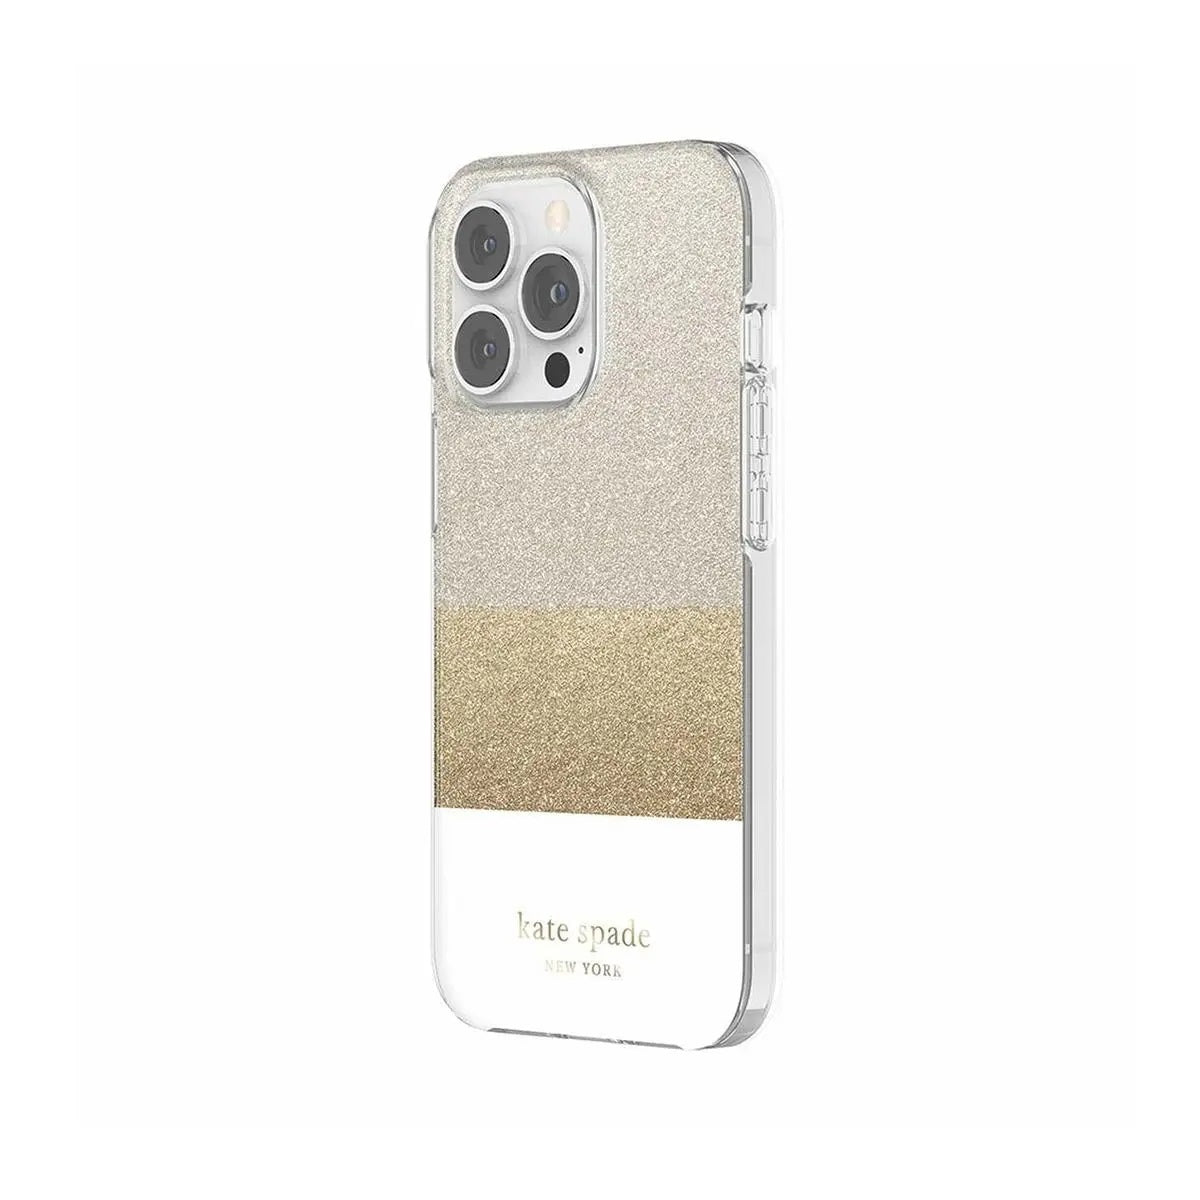 Kate Spade New York Protective Hardshell Case for iPhone 12 Pro Max/ 13 Pro Max (Glitter Block White)